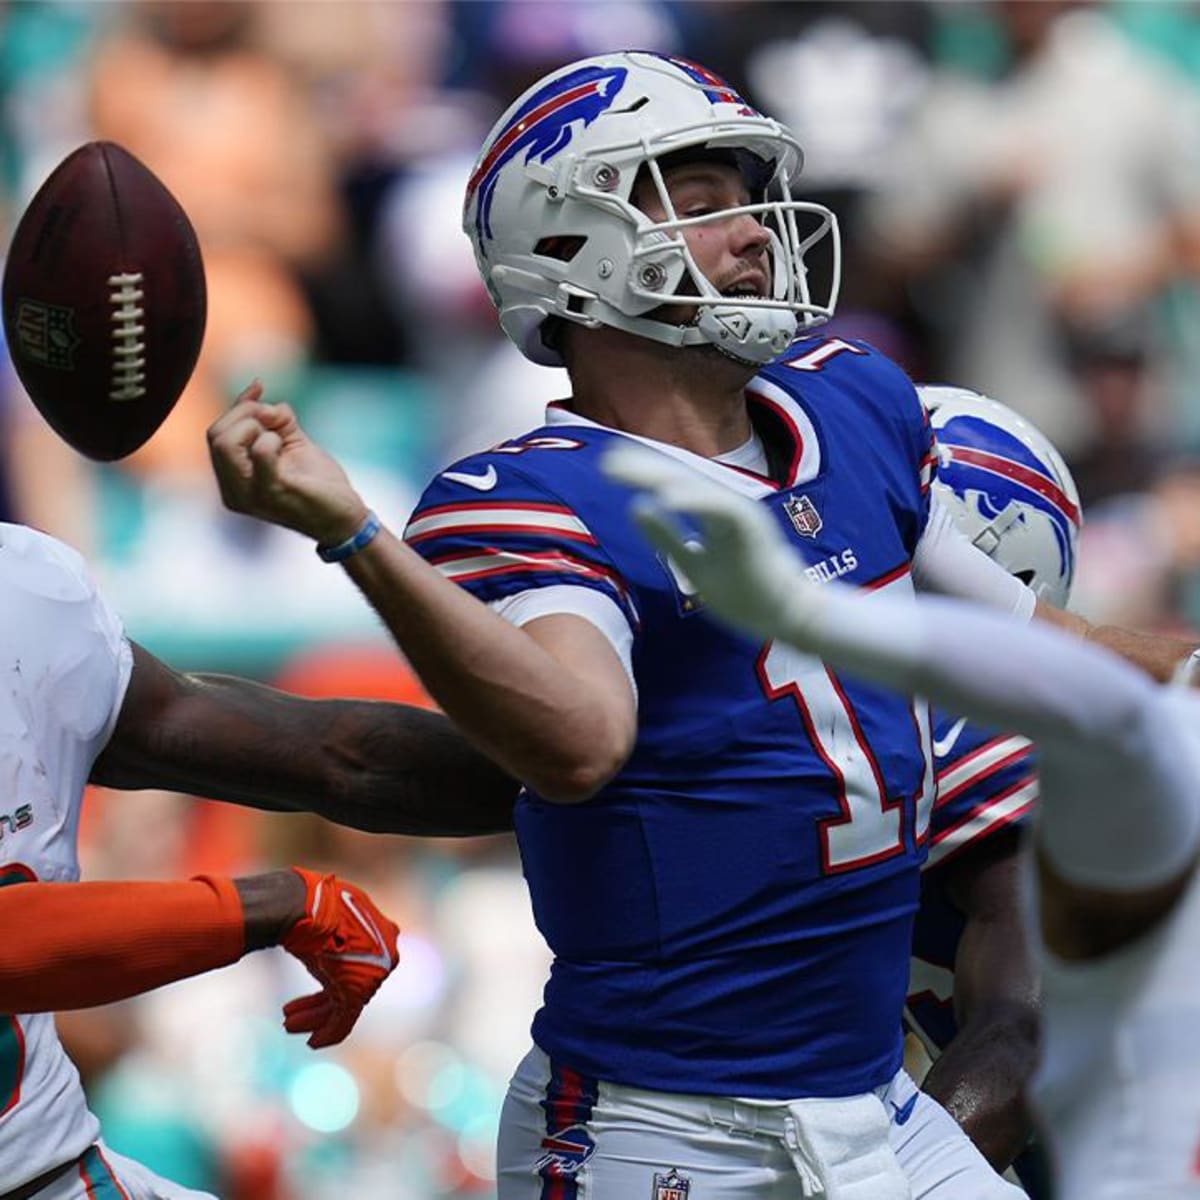 Bills at Dolphins Odds: Week 3 Spread, Total, Props & Betting Tips